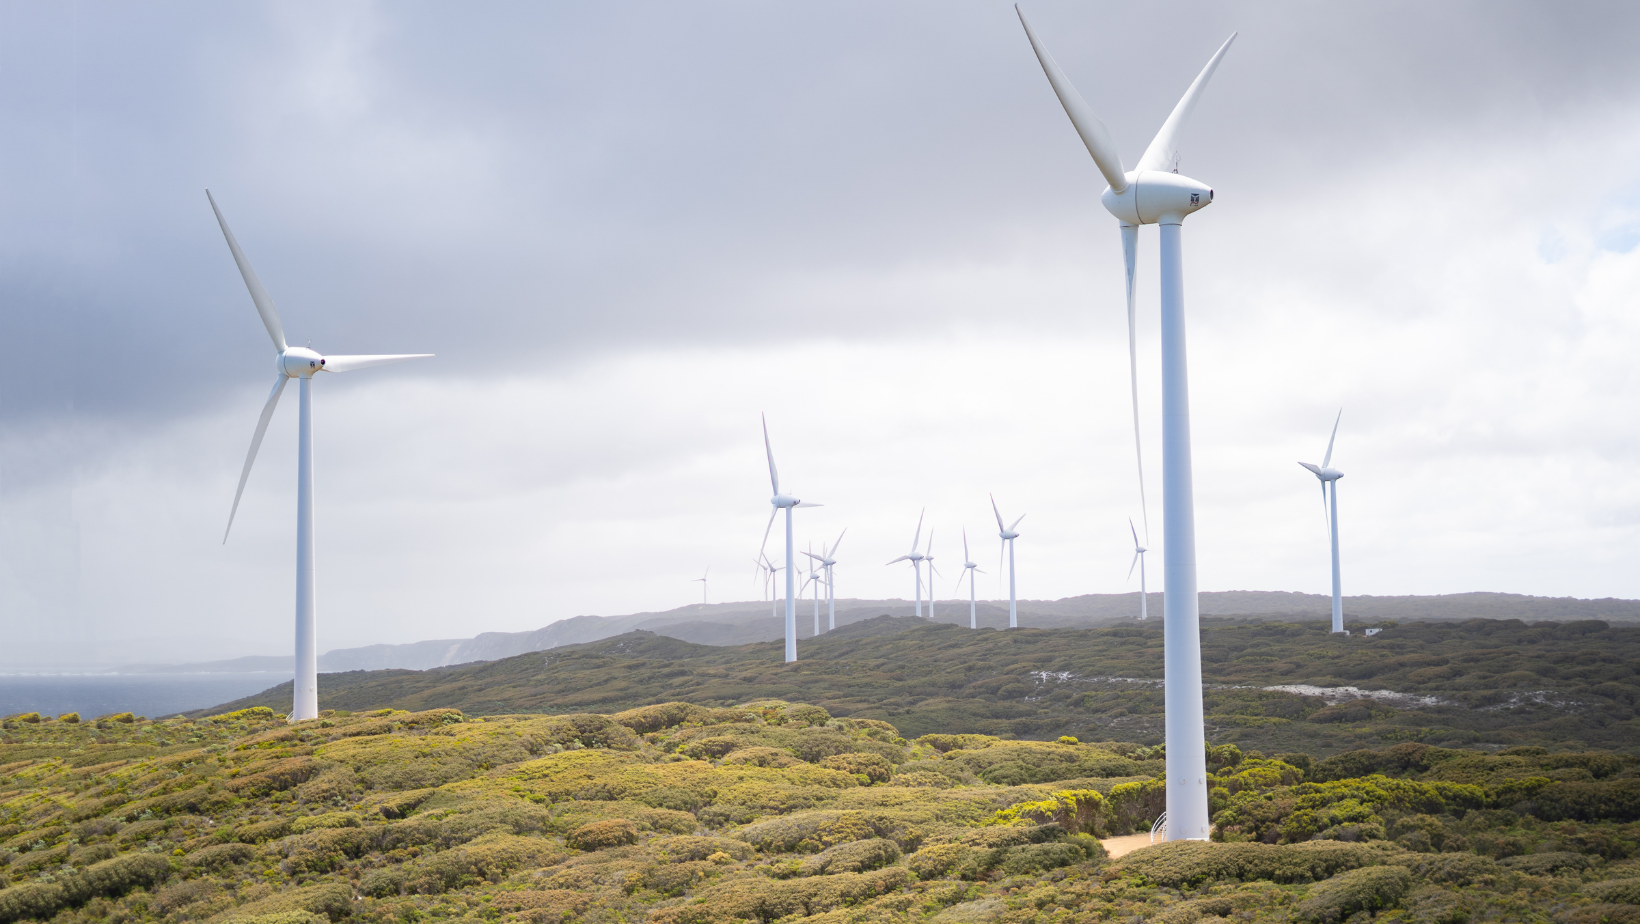 Impacts of wind turbine installation on businesses and communities